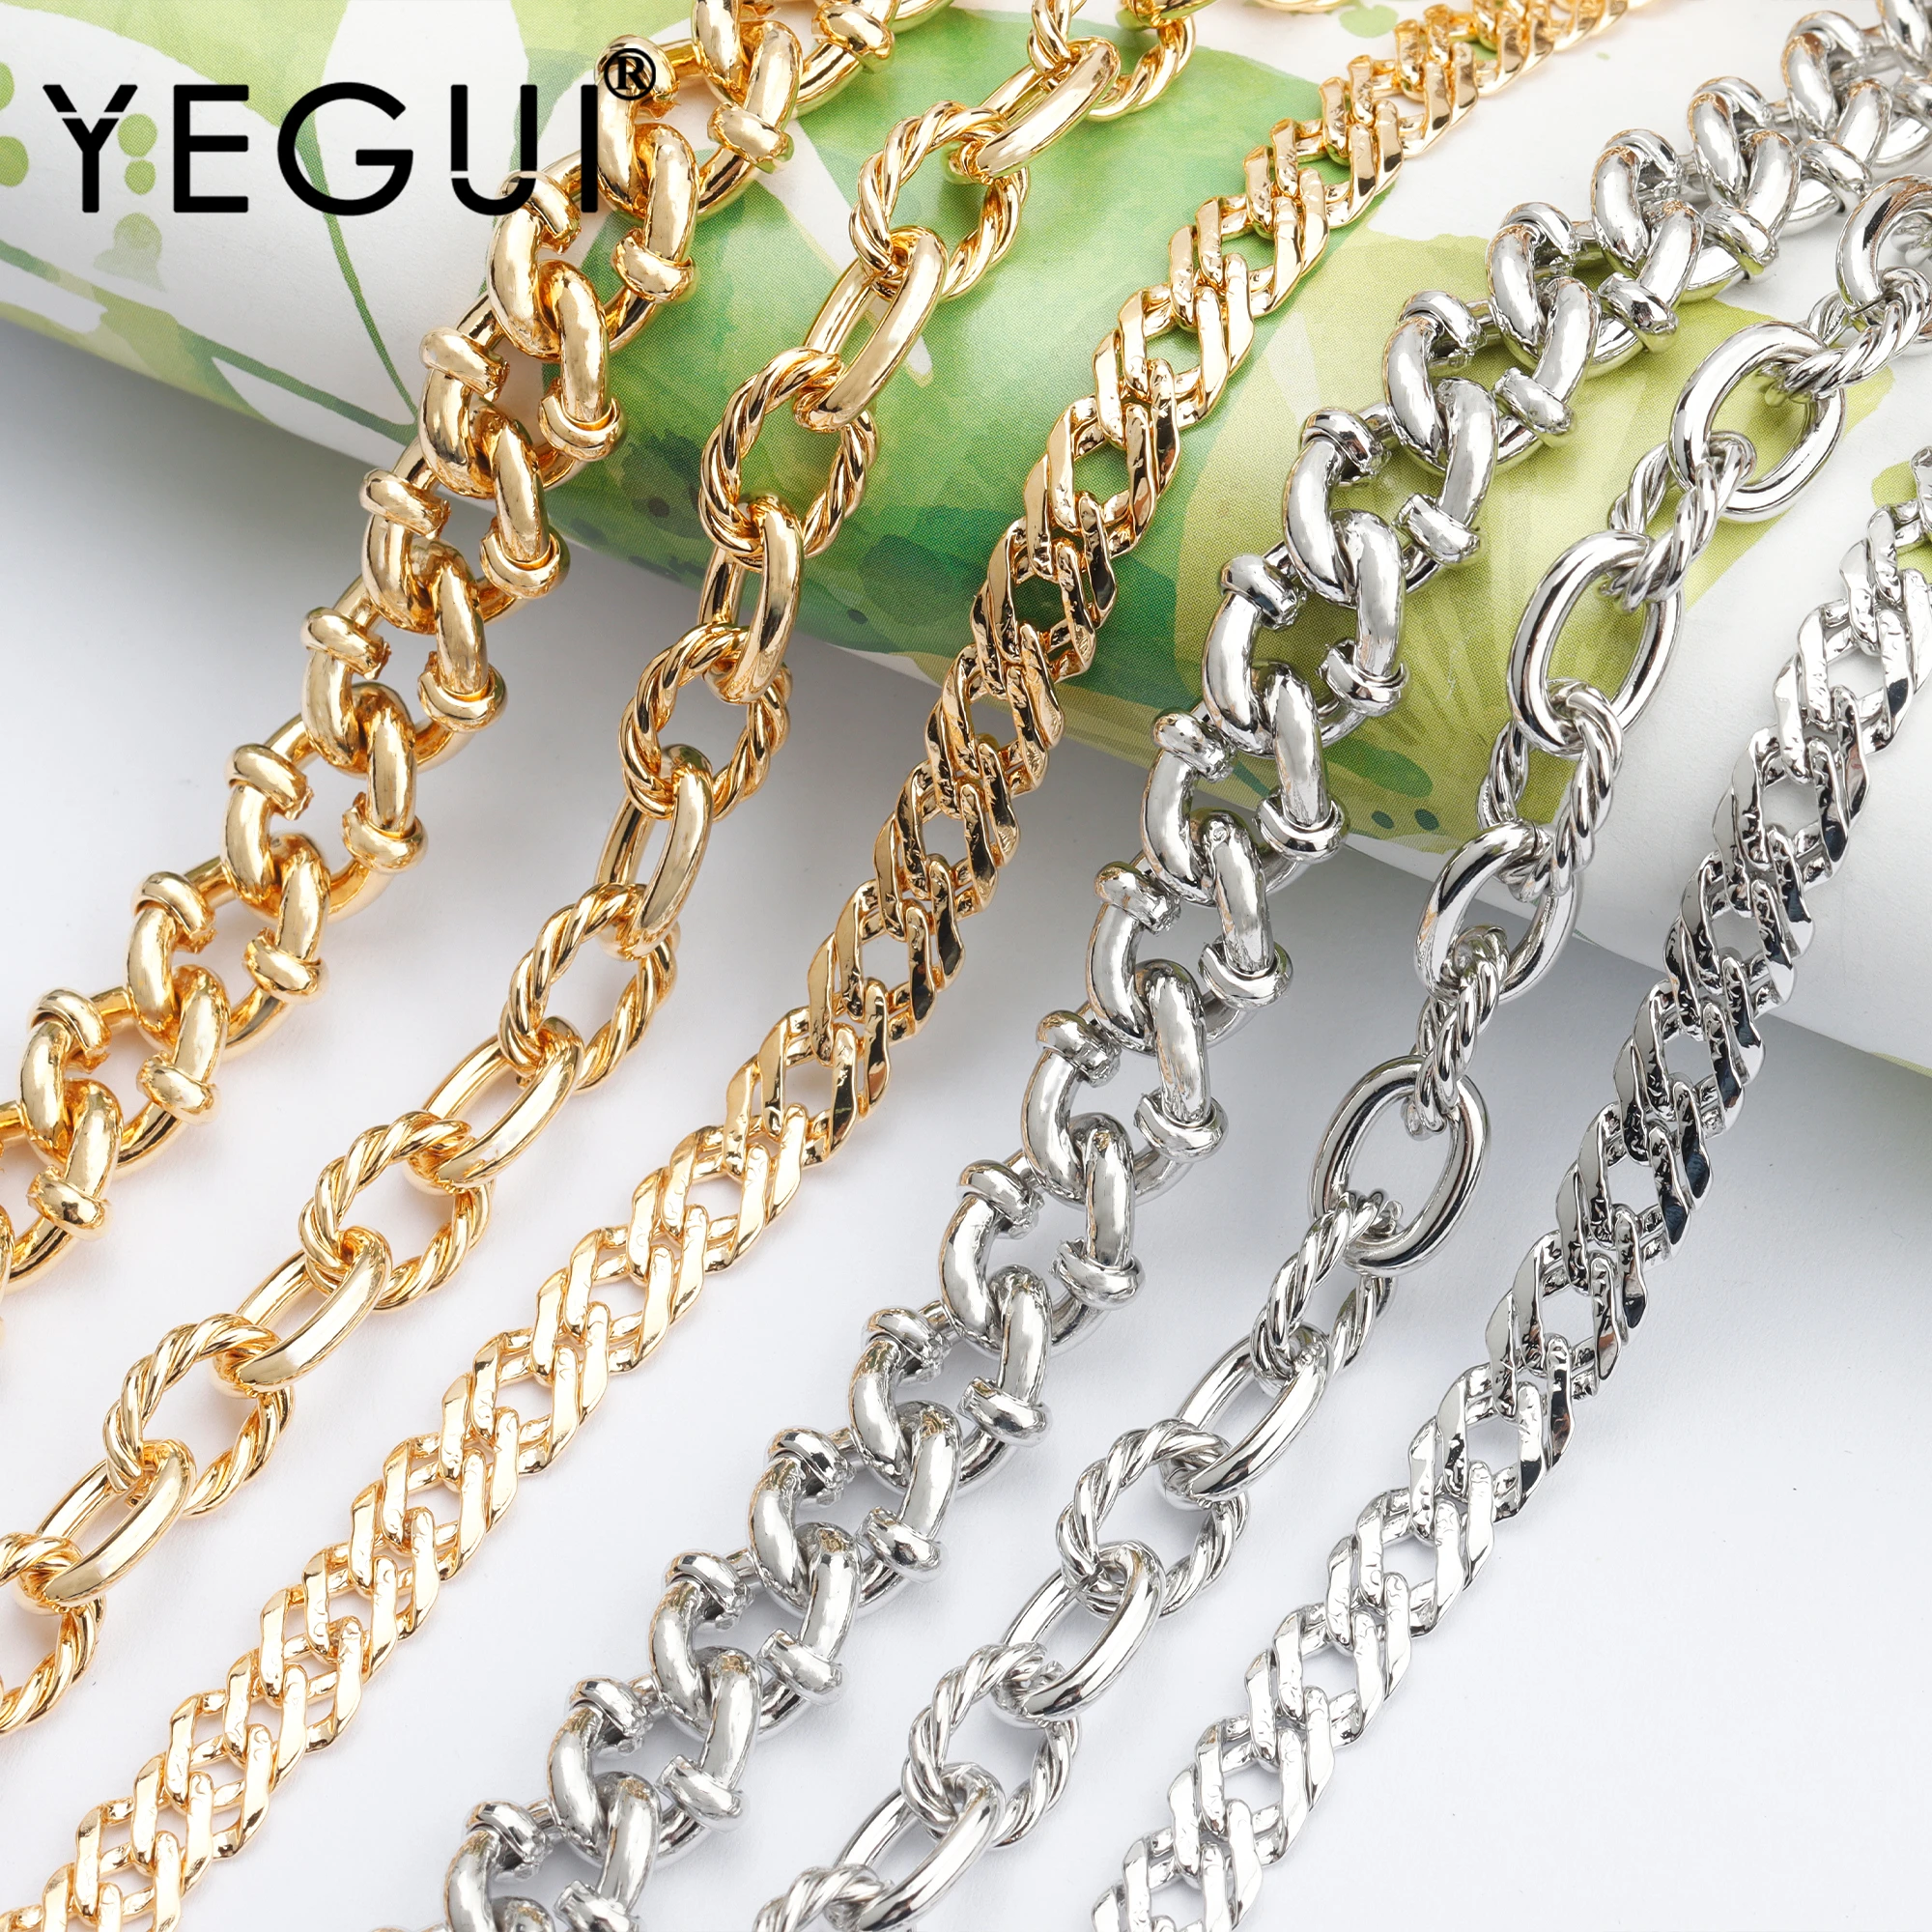 YEGUI C150,diy chain,rhodium plated,18k gold plated,0.3 microns,copper metal,charms,diy bracelet necklace,jewelry making,1m/lot